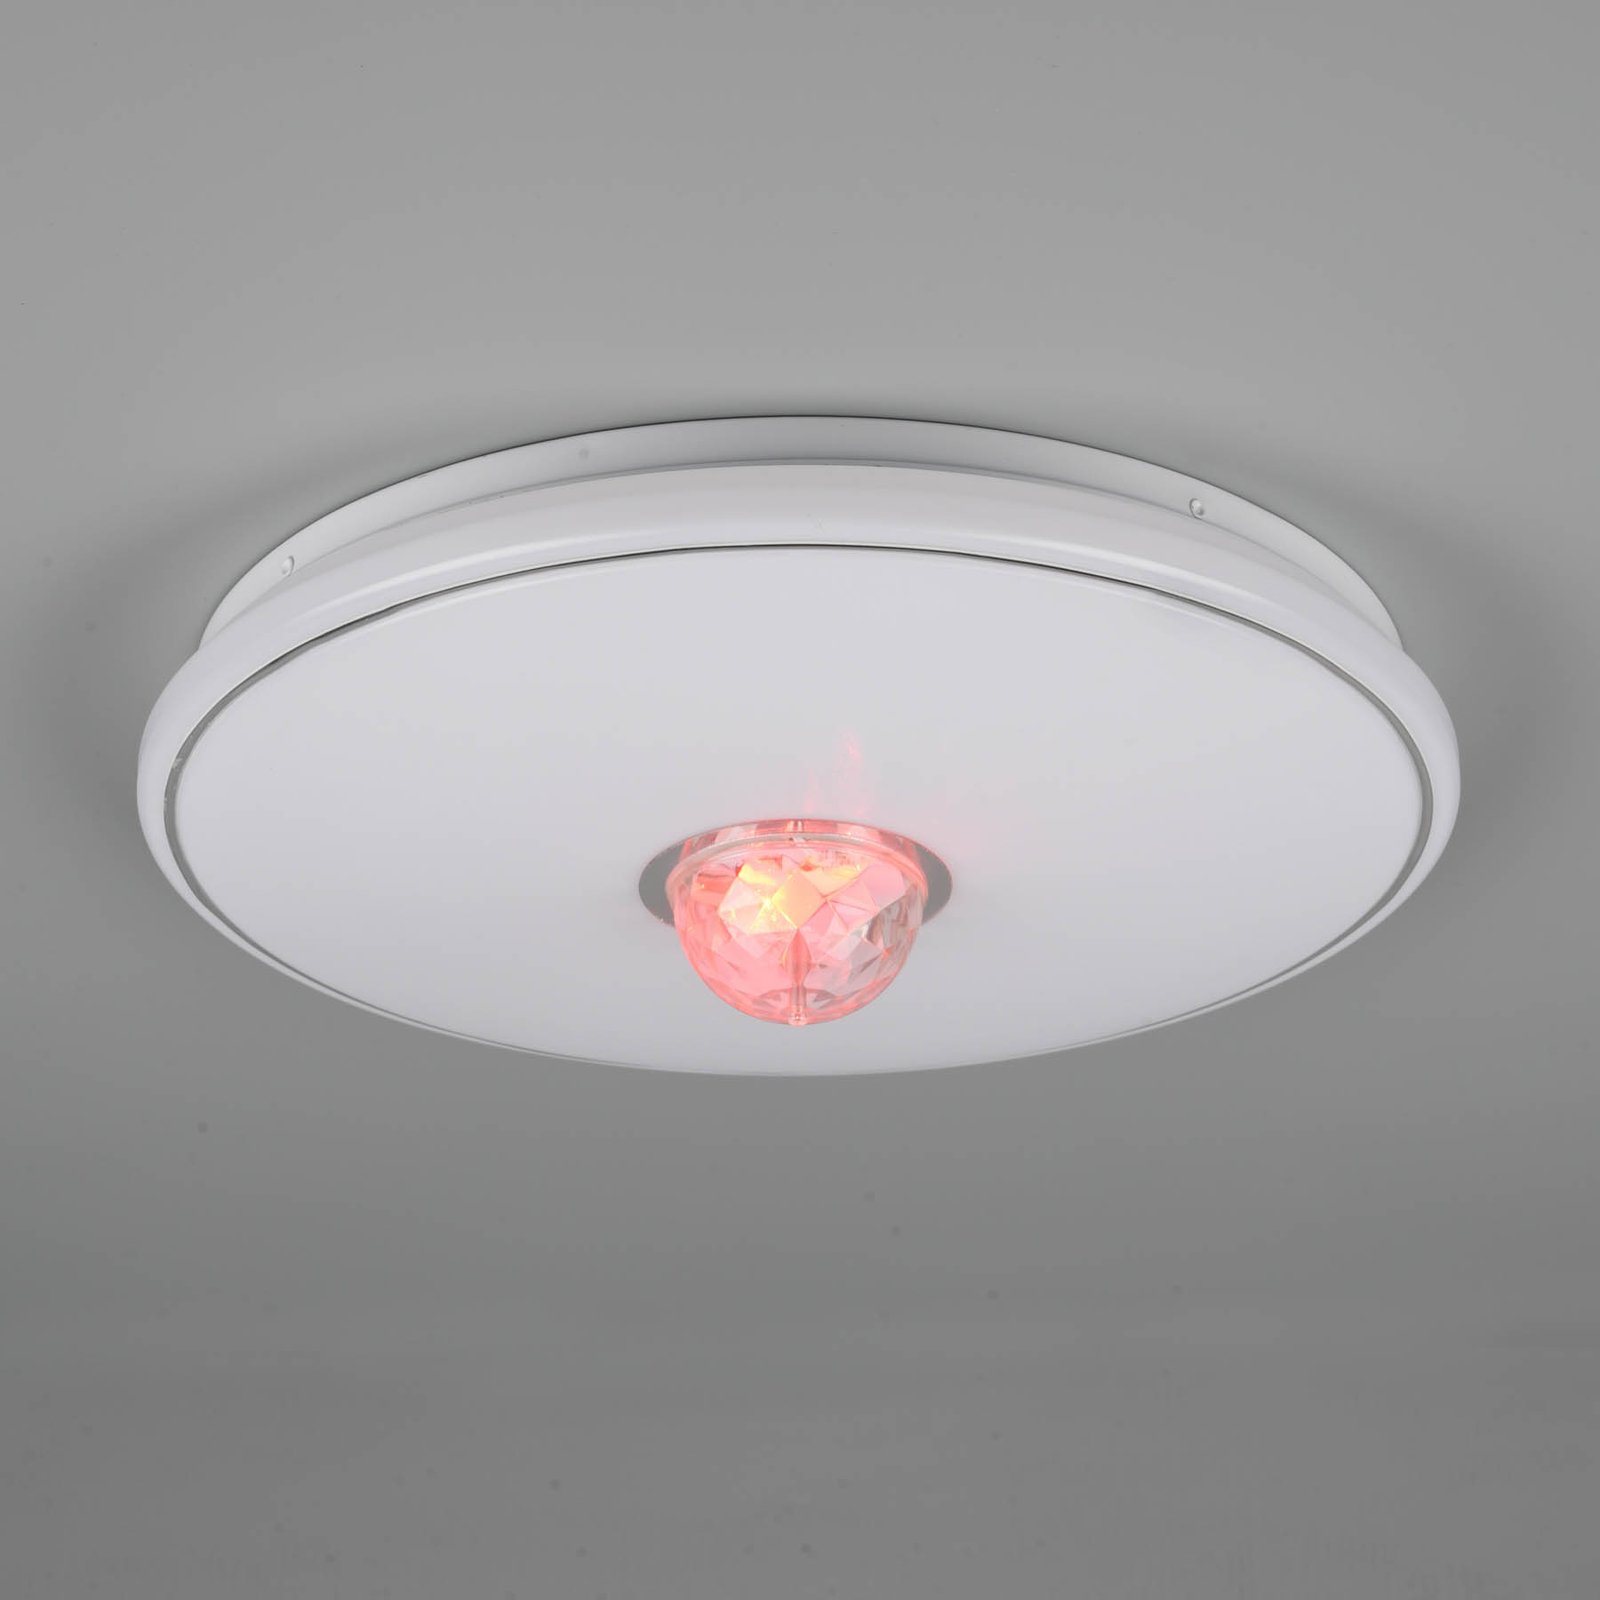 Rave LED ceiling lamp, remote control dimmable RGB